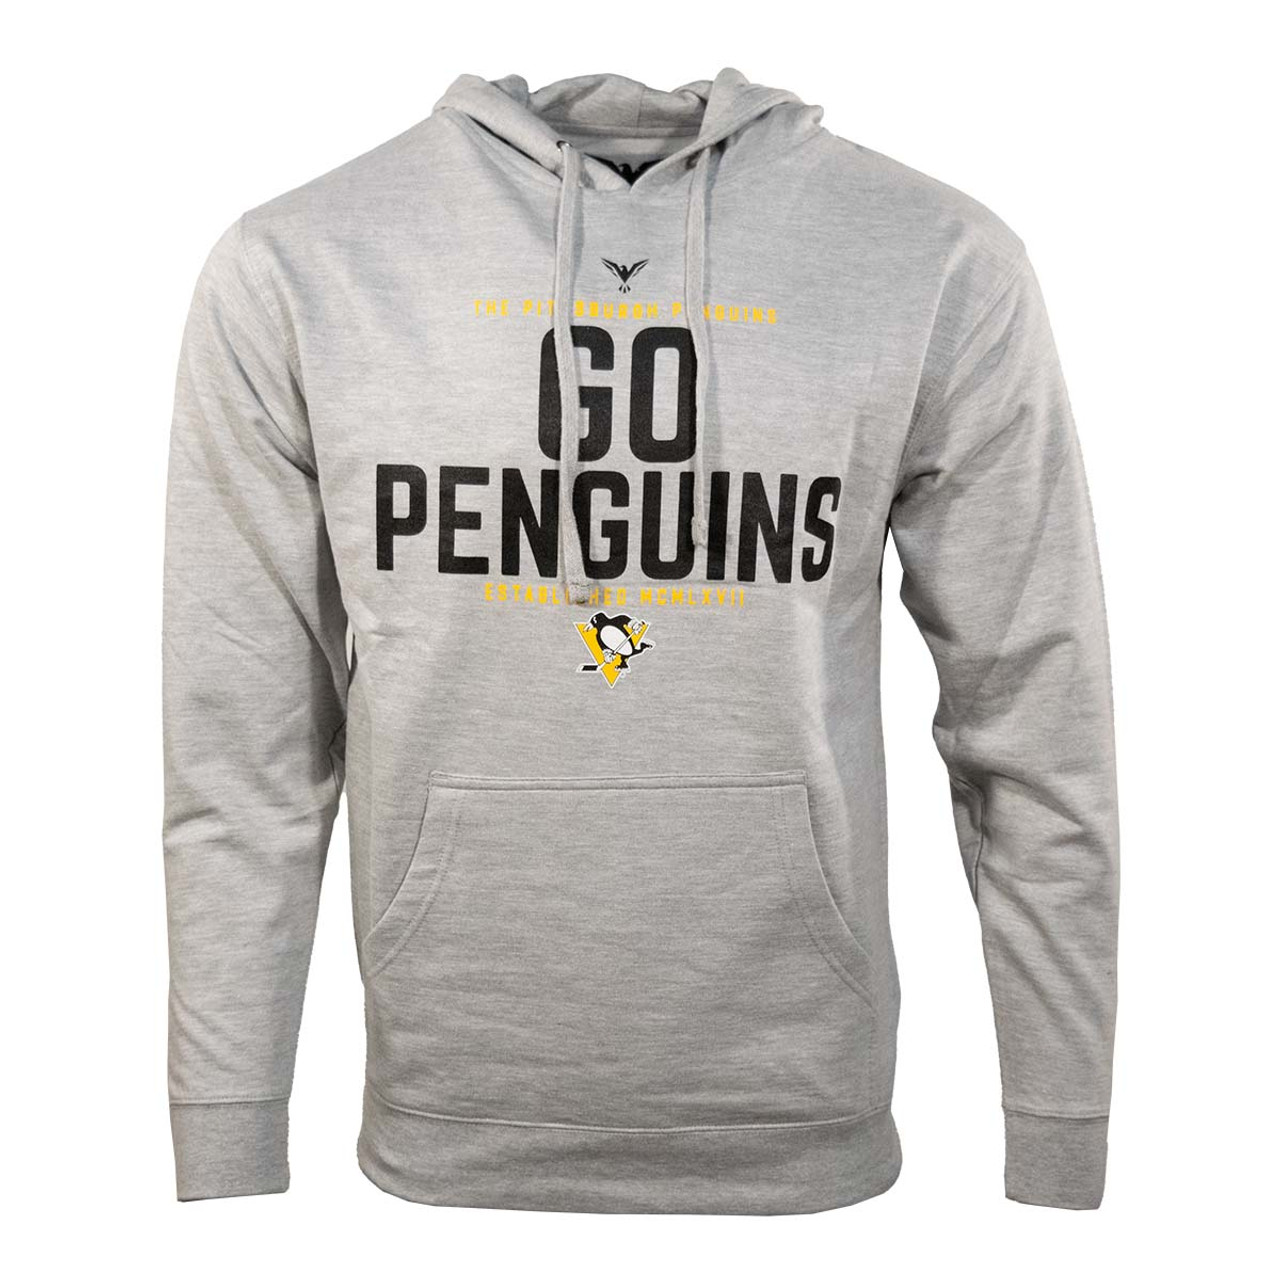 Official Pittsburgh penguins let's go pens 2023 T-shirt, hoodie